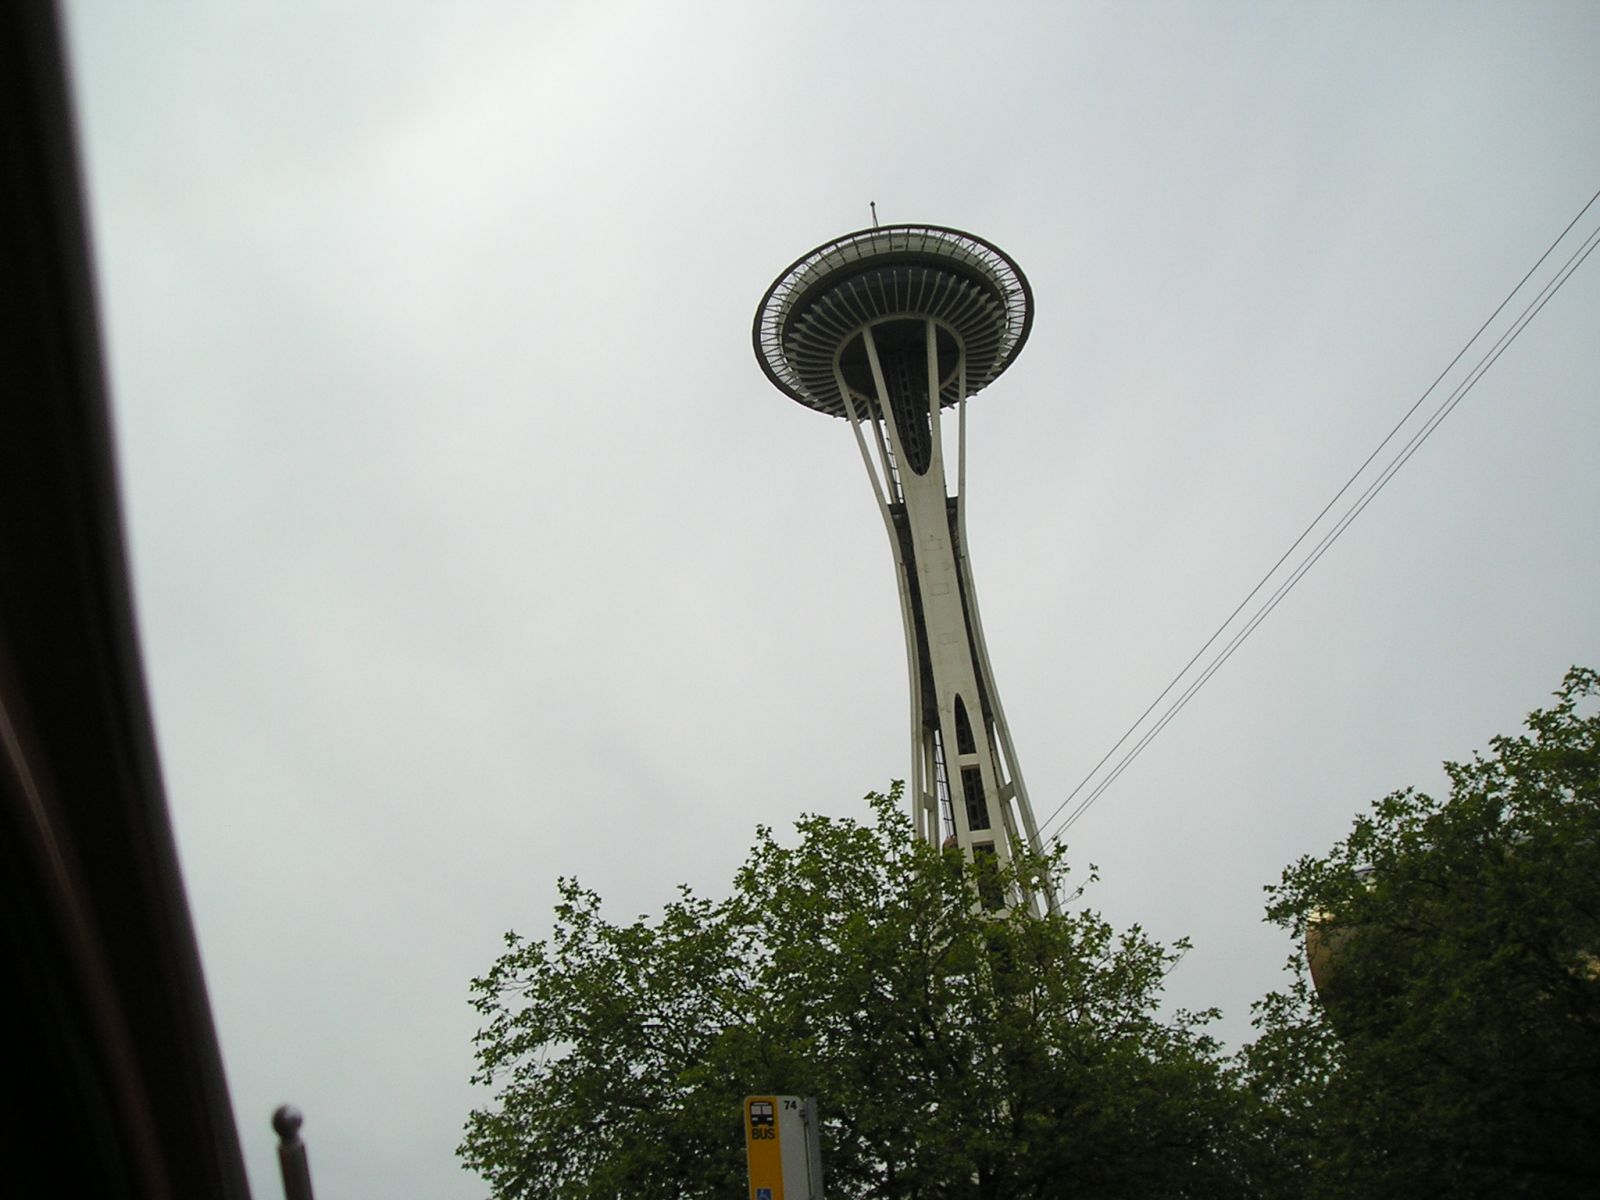 Space needle in Seattle